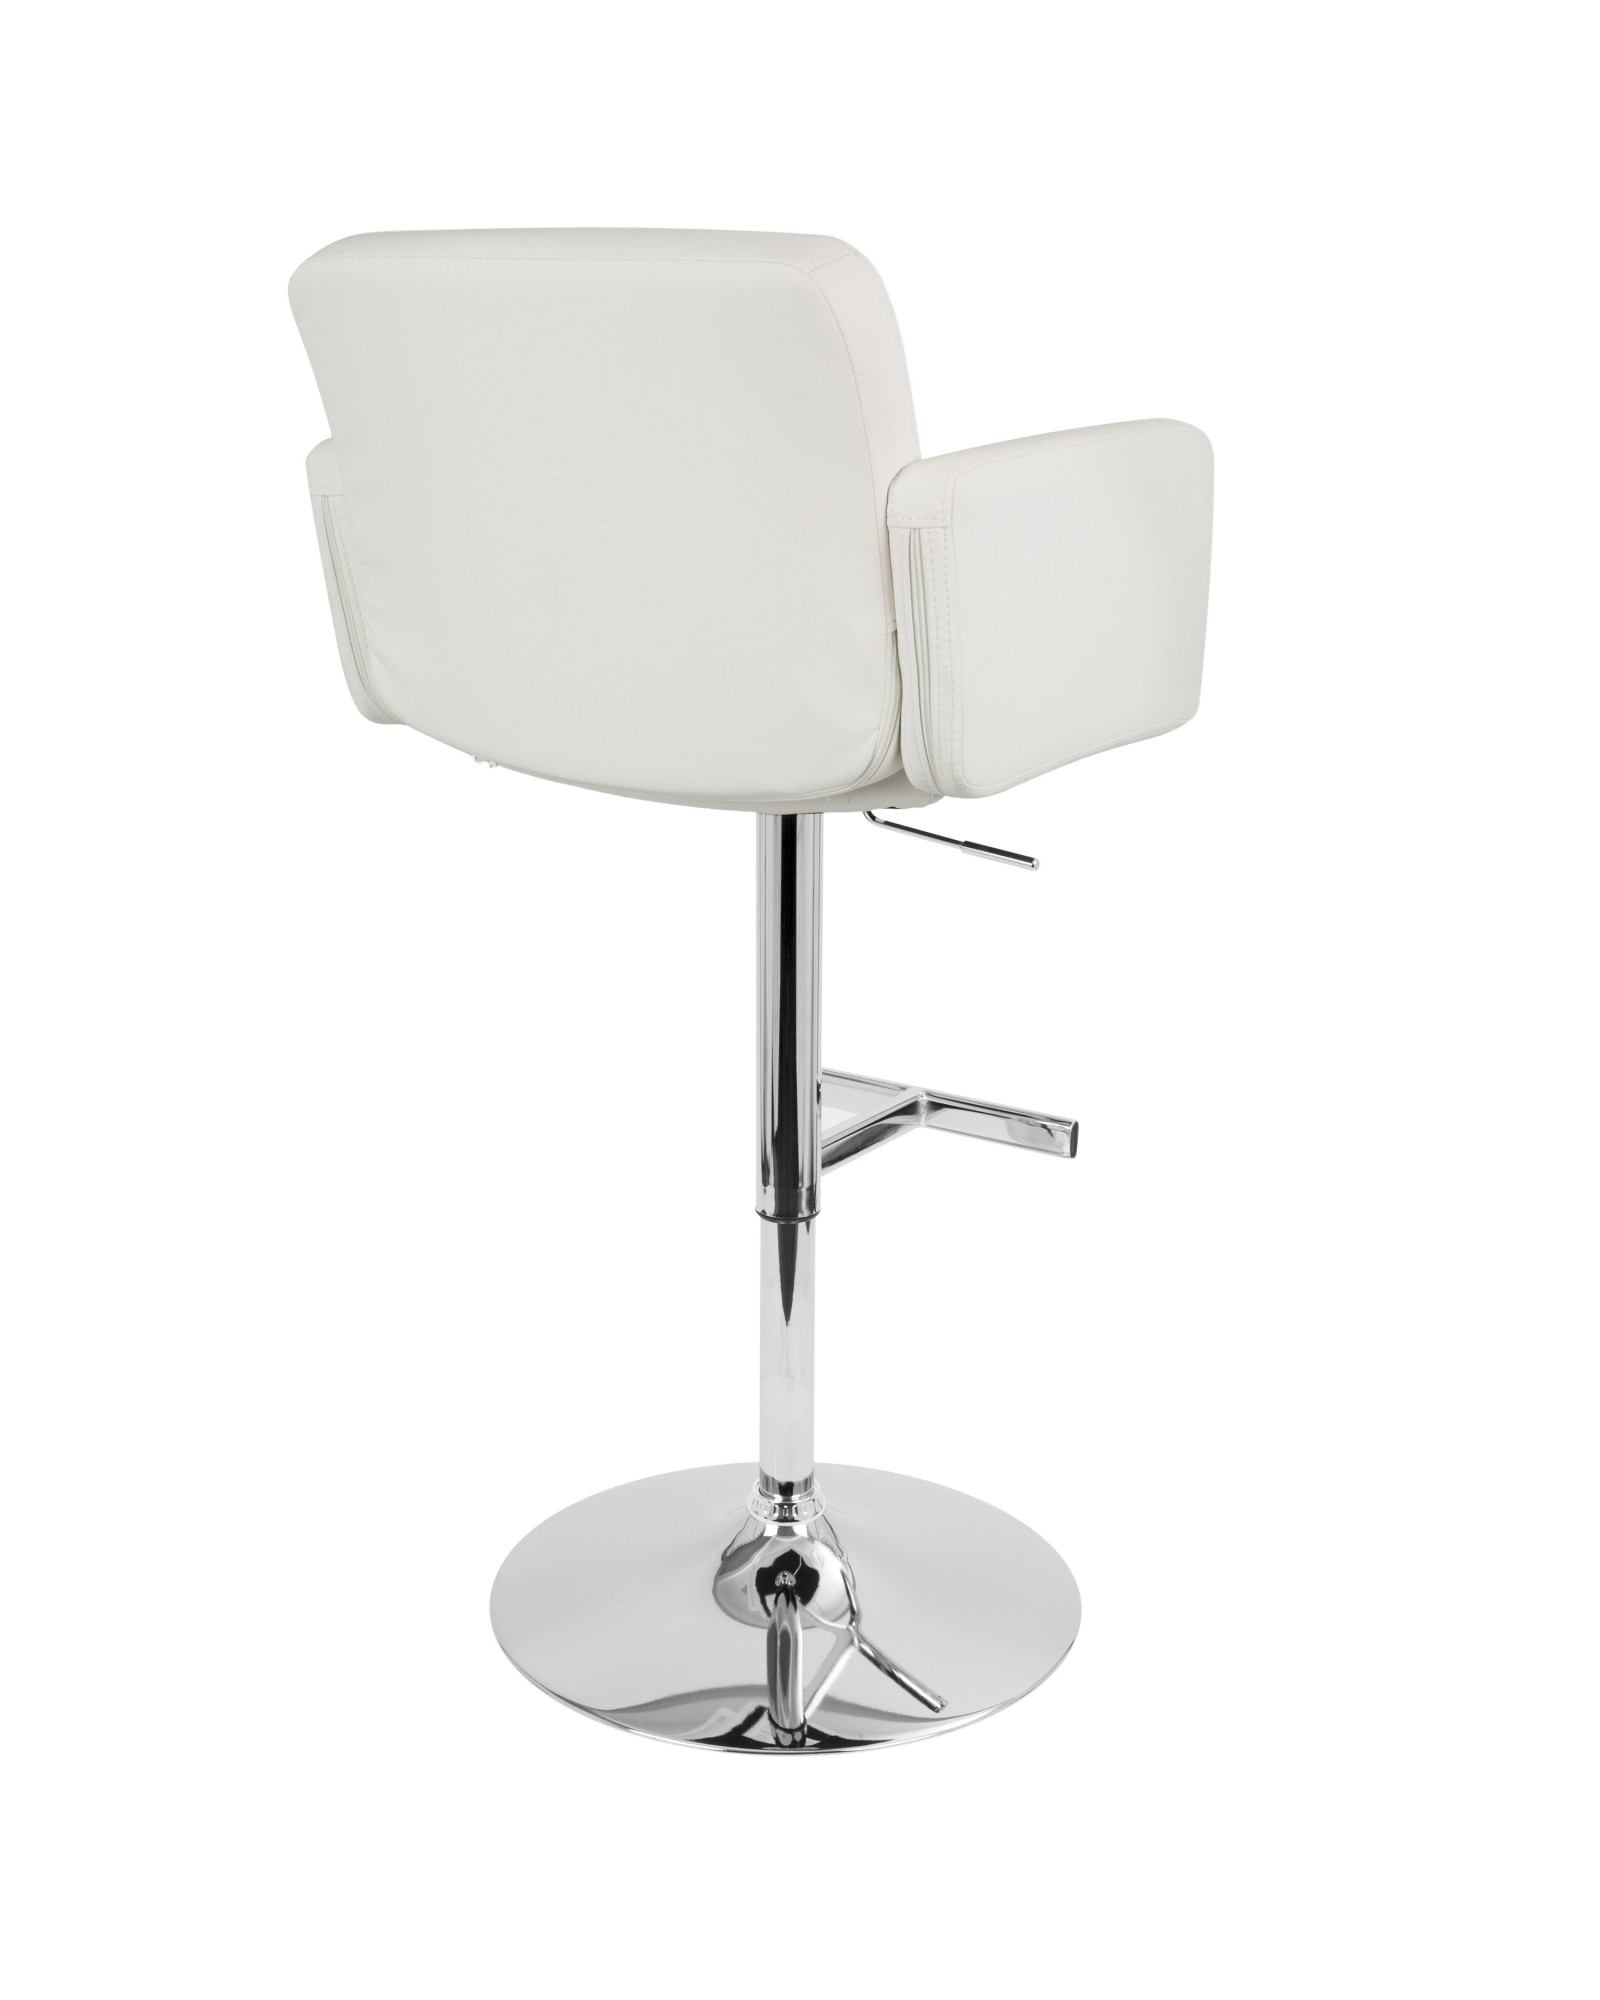 Stout Contemporary Adjustable Barstool with Swivel and White Faux Leather